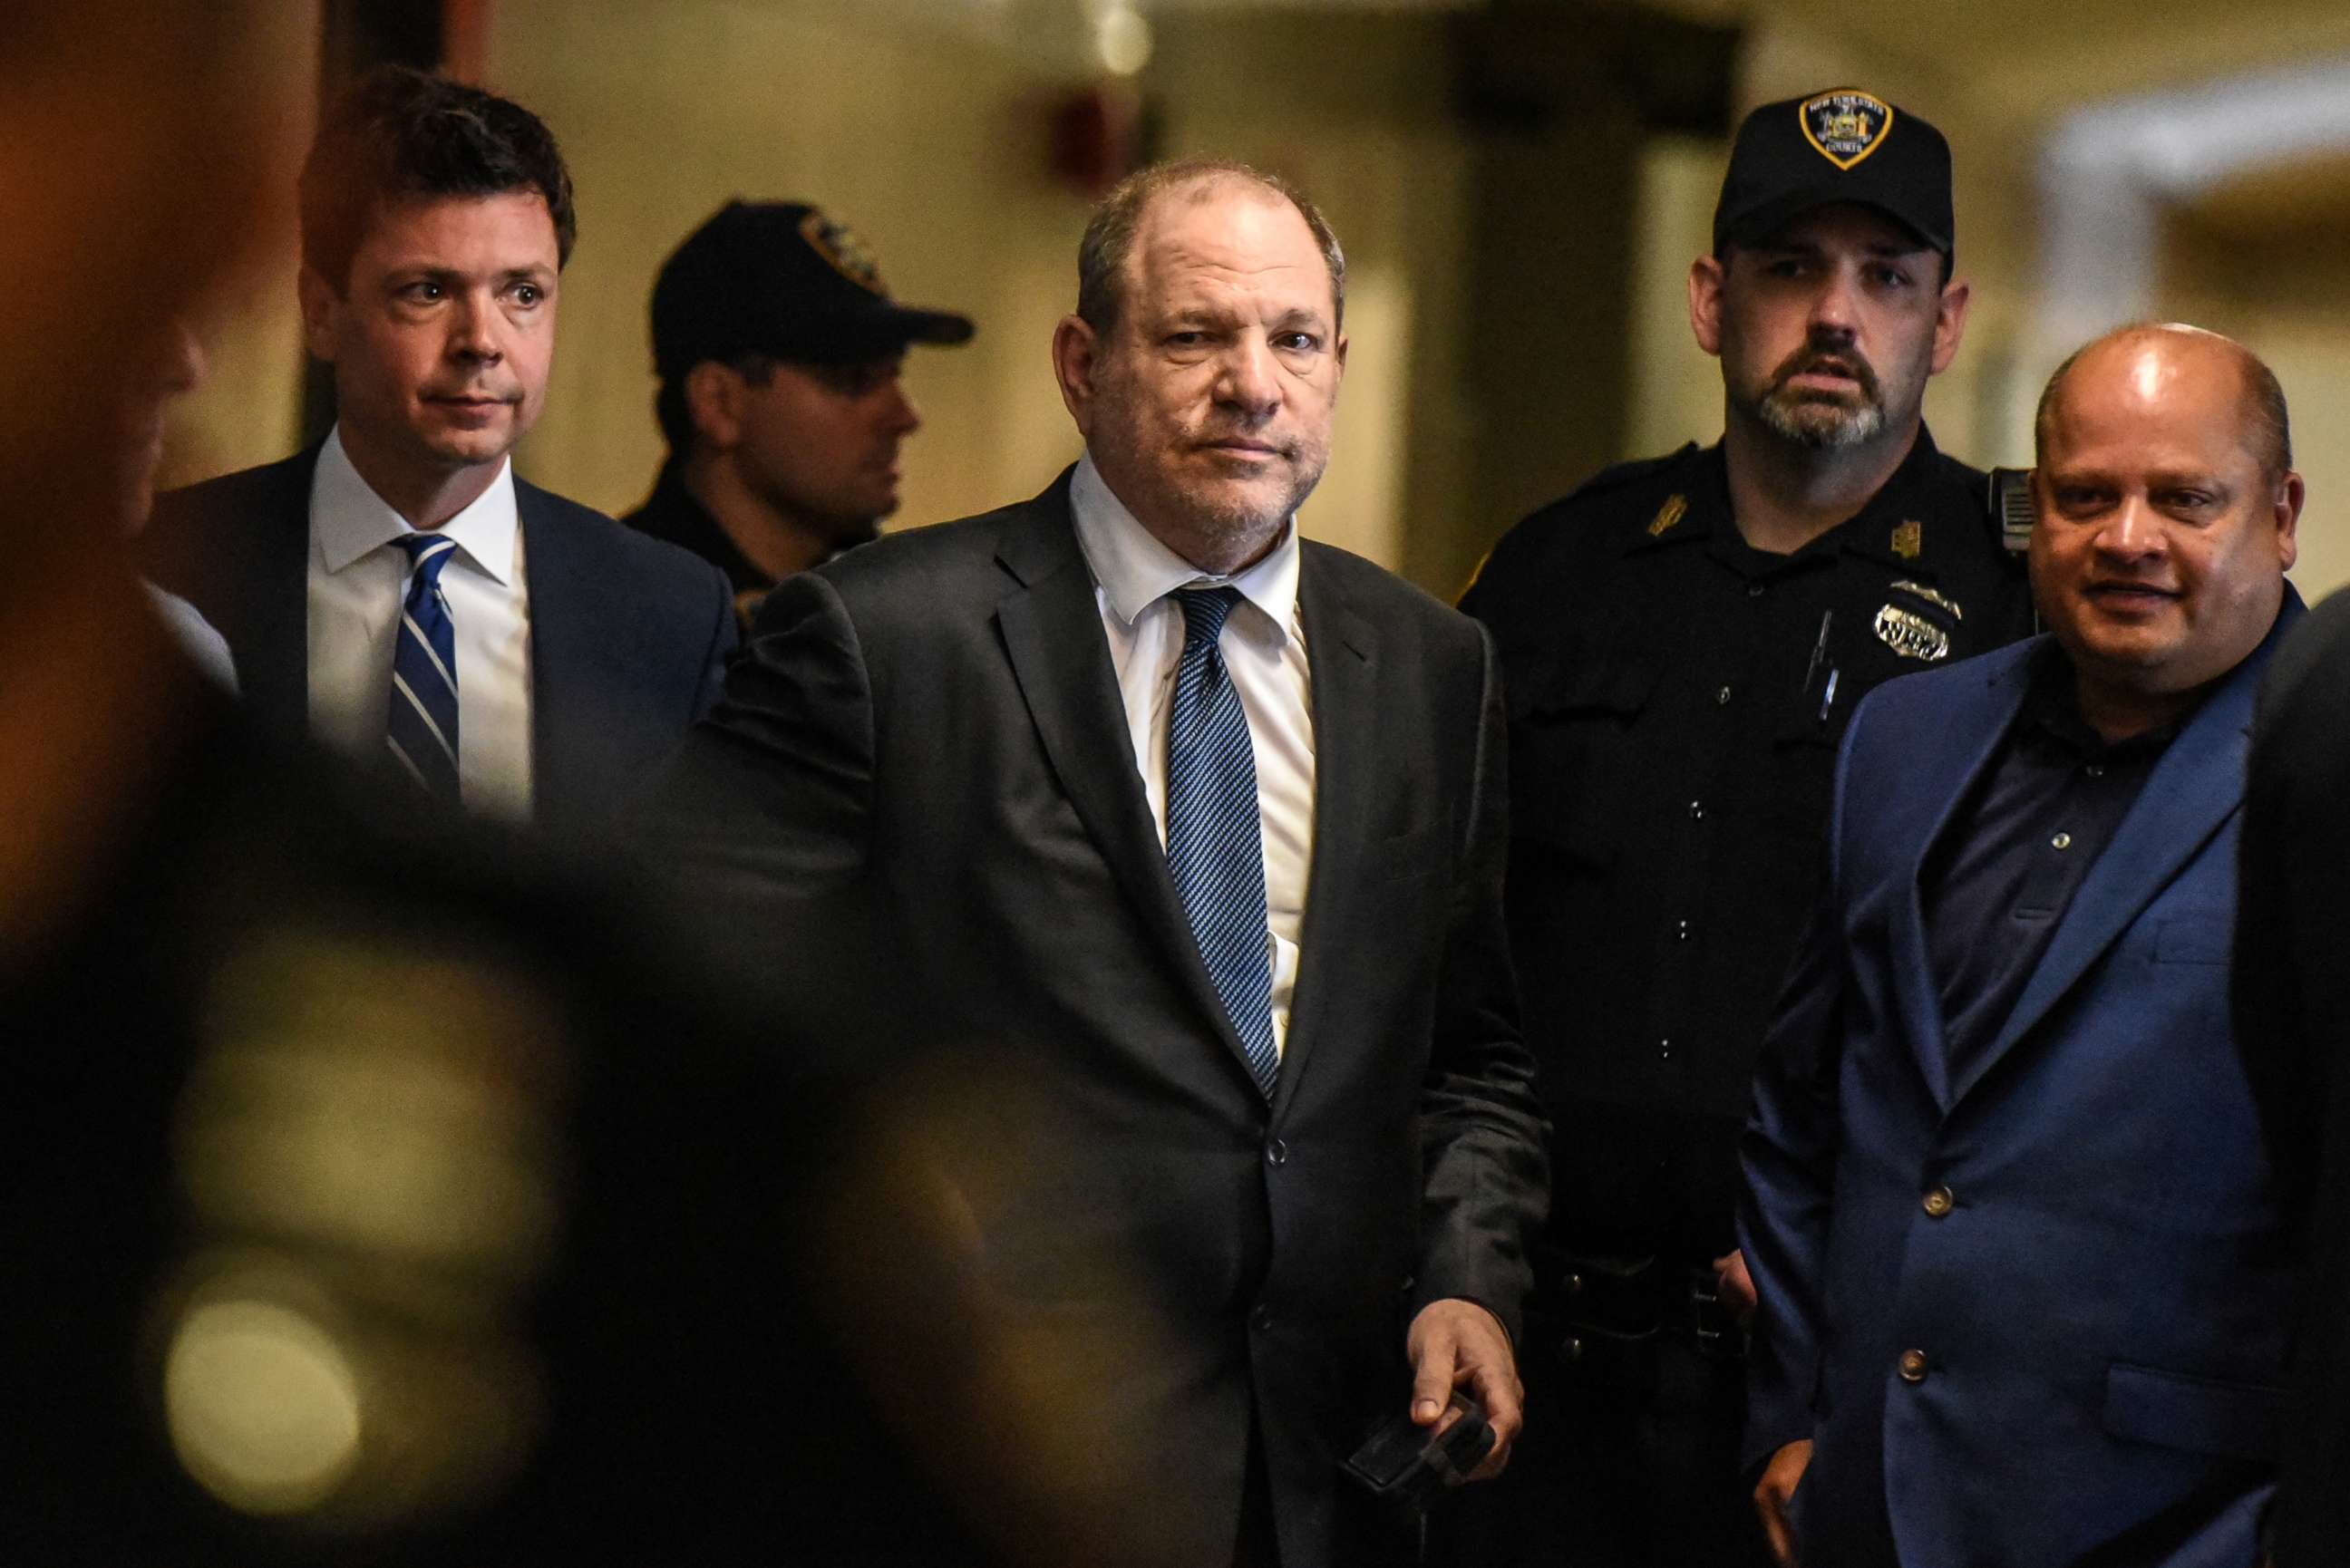 PHOTO: Harvey Weinstein enters the courthouse on July 11, 2019, in New York City.